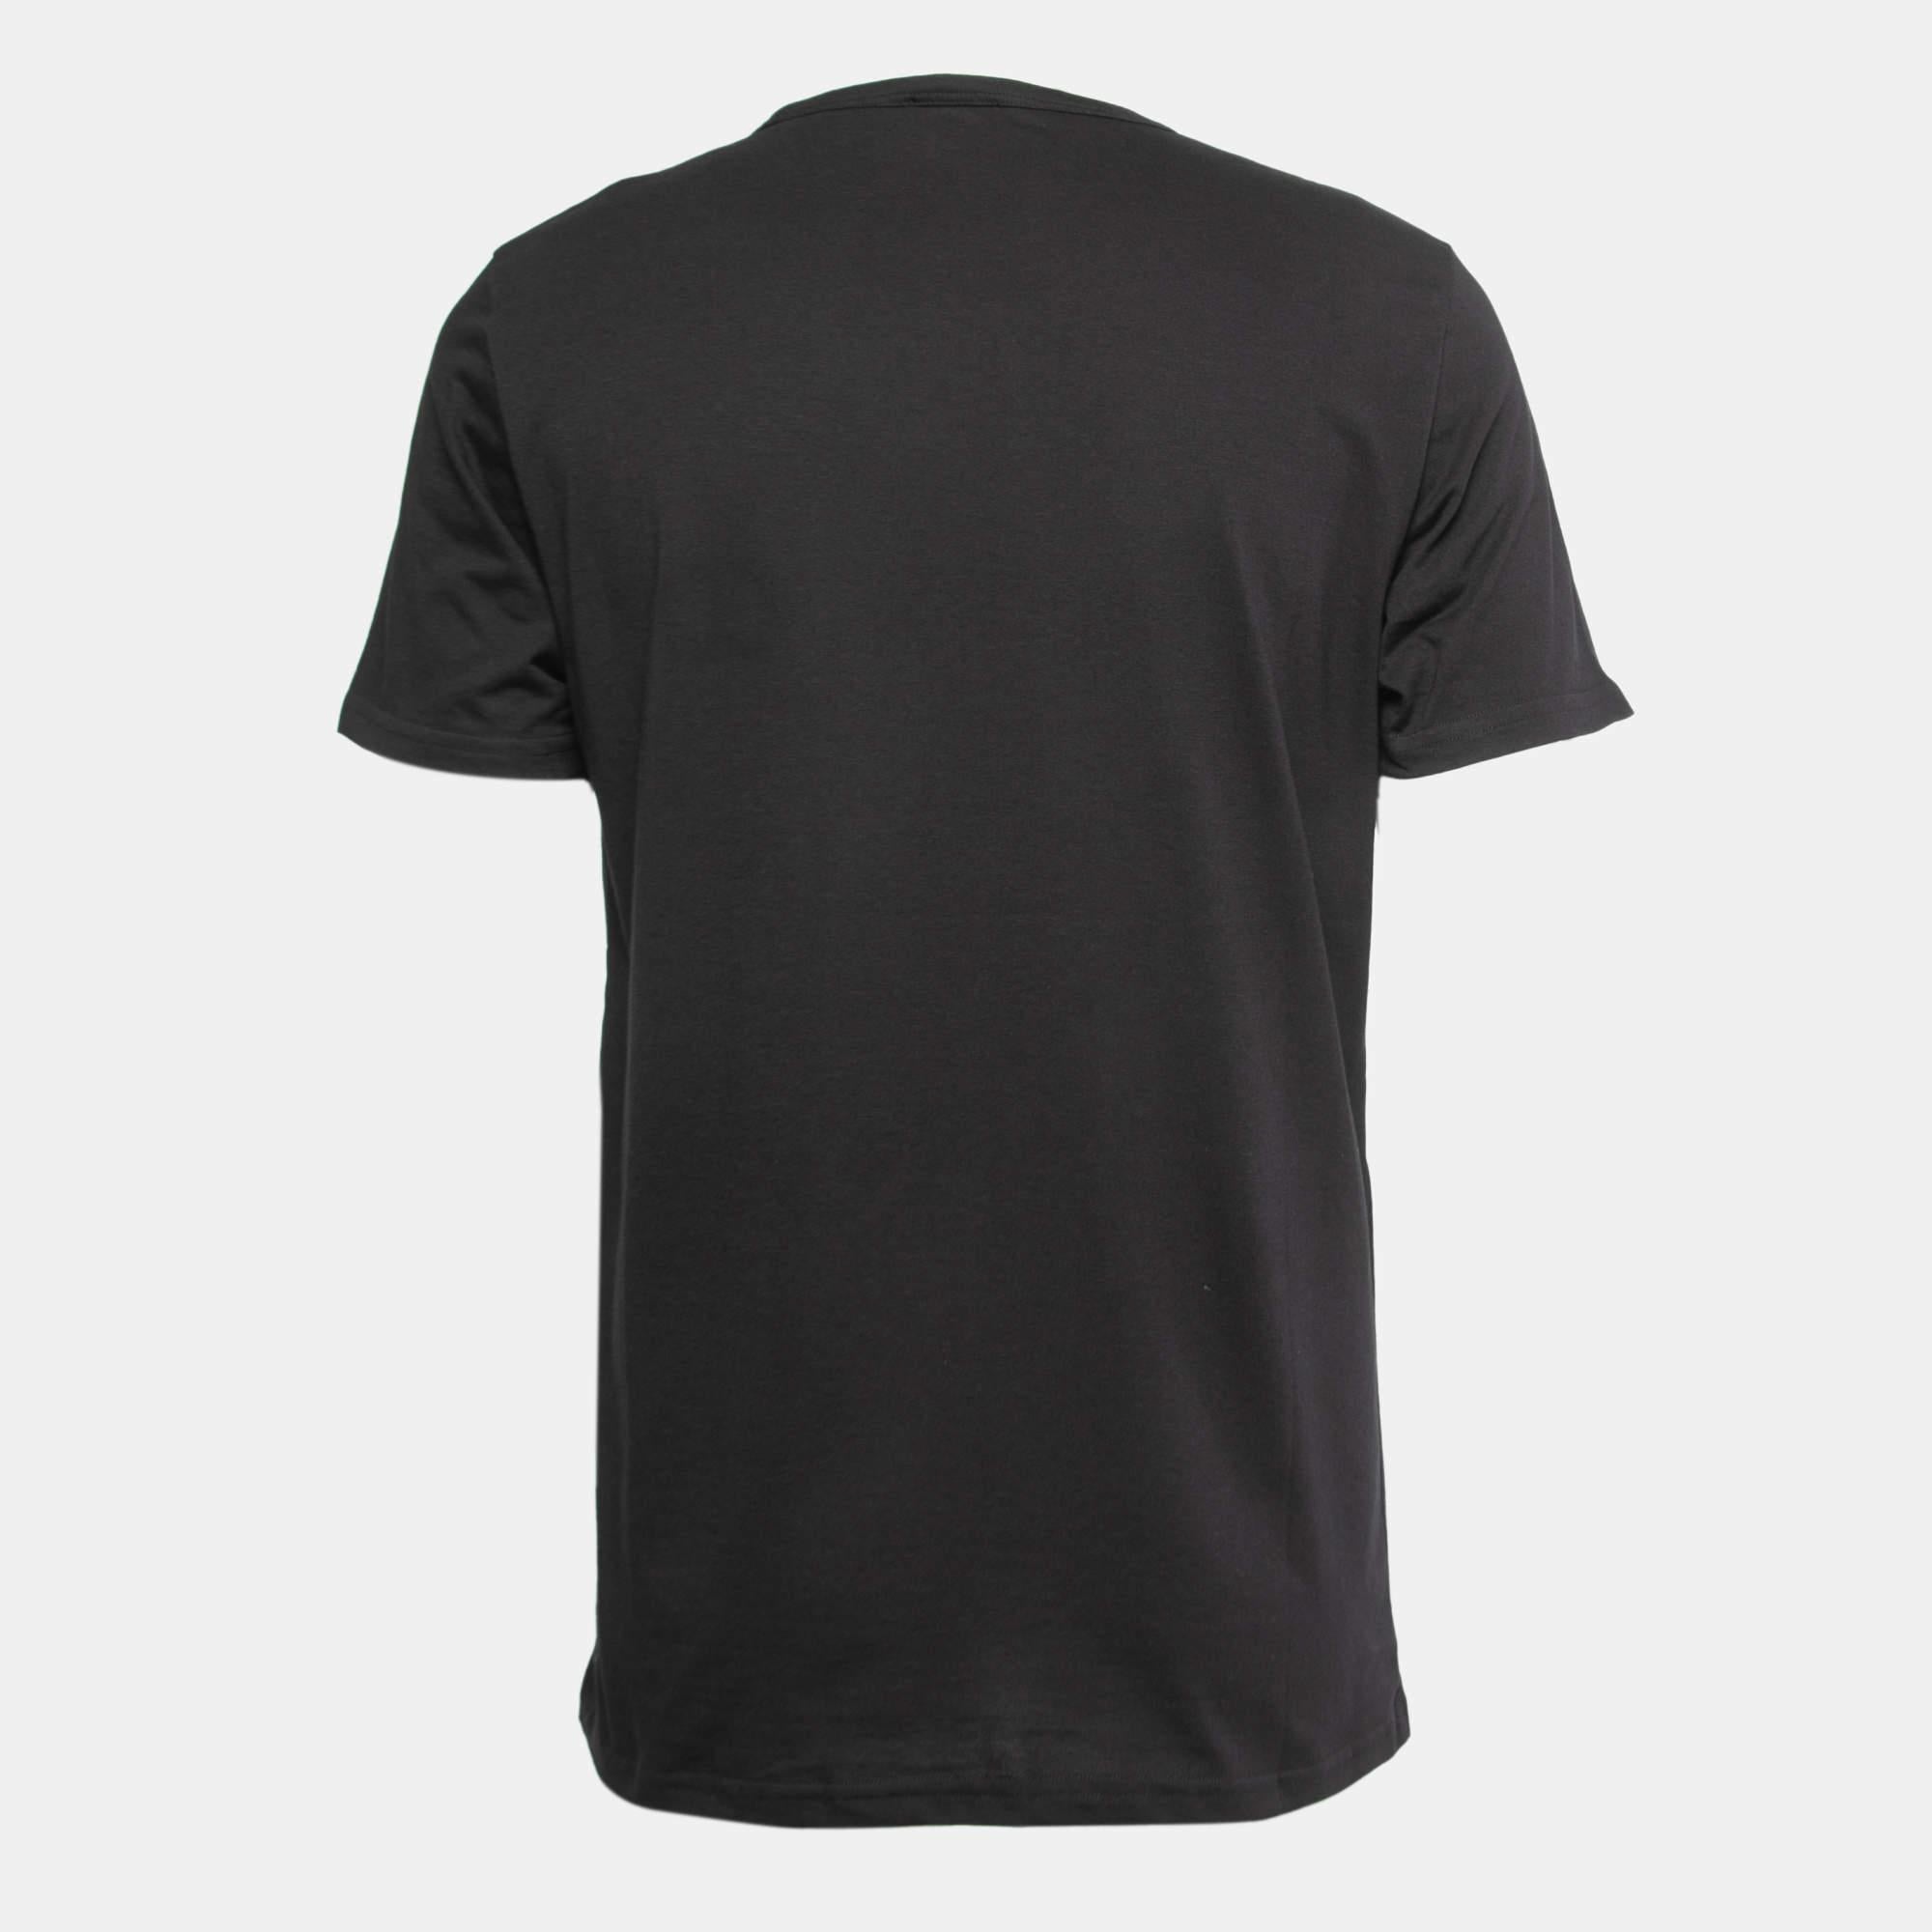 A perfect combination of comfort, luxury, and style, this designer t-shirt is a must-have piece! Made from quality materials, the creation can be styled with denim pants and sneakers for a cool look.

Includes: Original Pouch, Brand Tag
